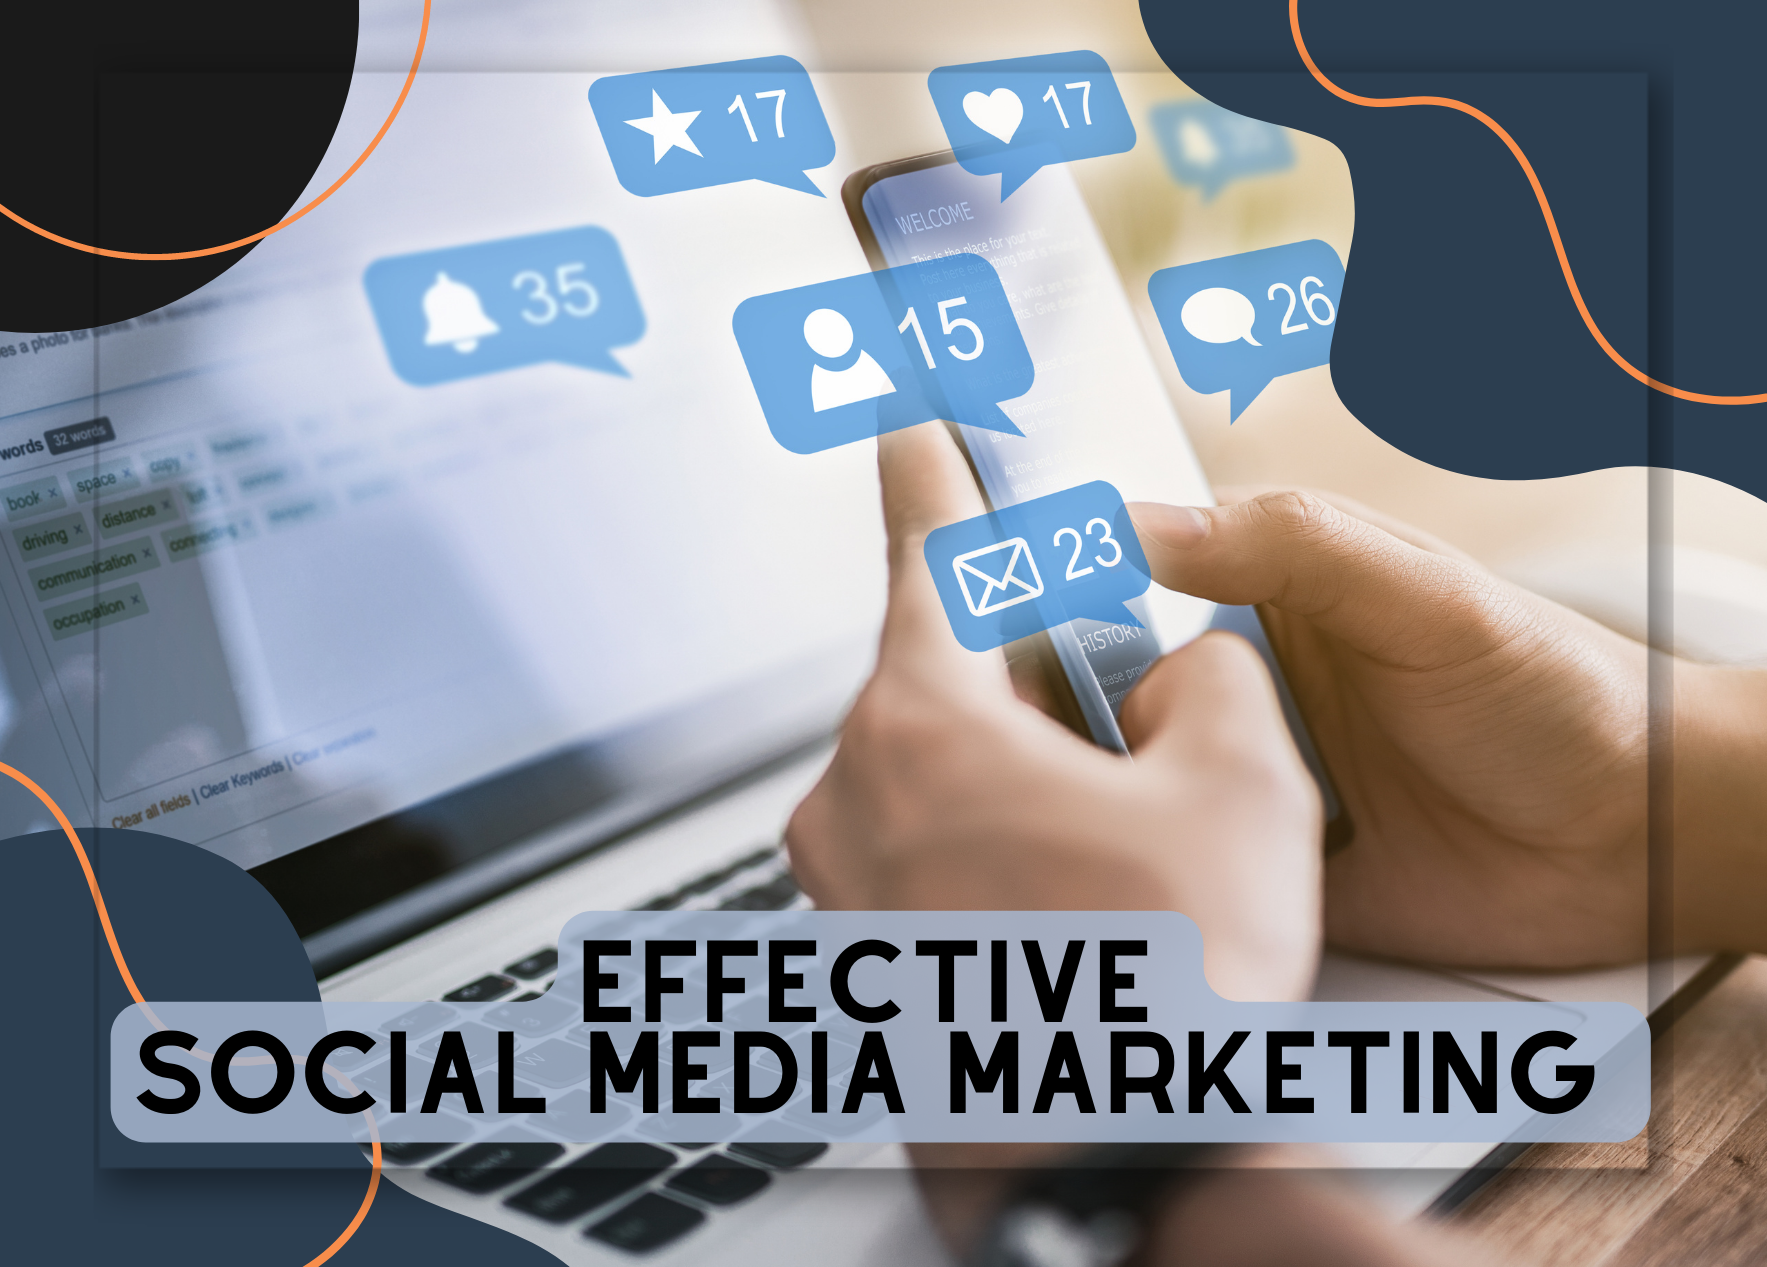 How to implement effective social media marketing